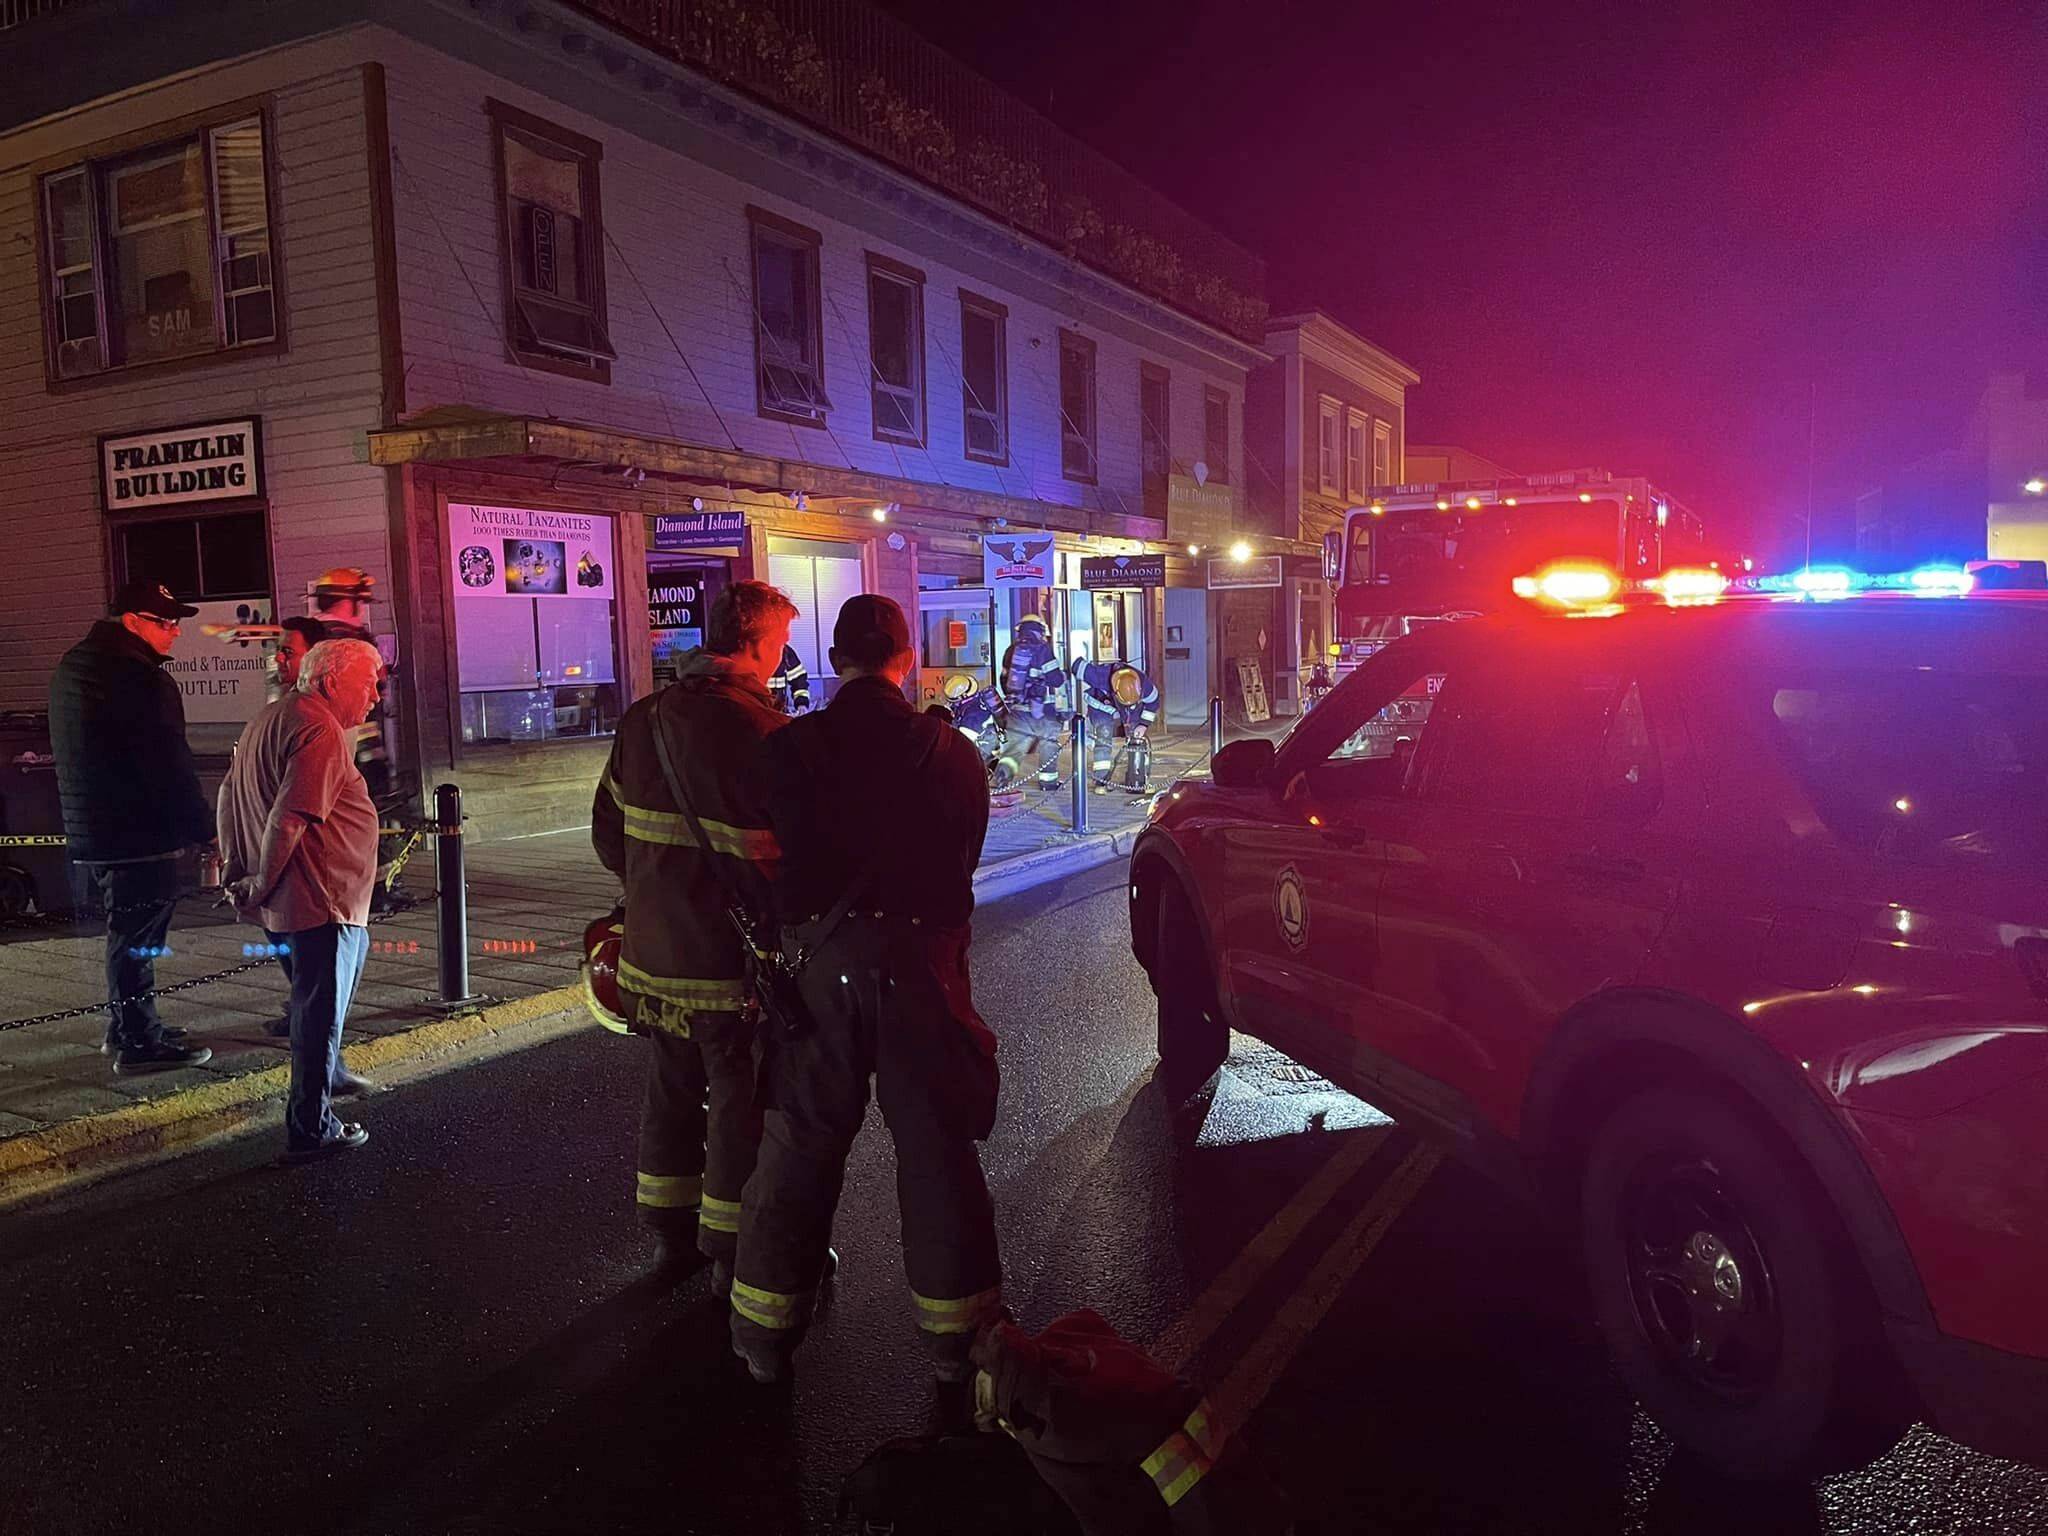 Capital City Fire/Rescue responded Tuesday night to a fire in the 300 block of South Franklin Street. No one was hurt in the fire, which was contained to the walls and ceiling of the roughly 130-year-old building, but a sprinkler system that activated during the fire caused water damage, according to CCFR. (Courtesy Photo / CCFR)